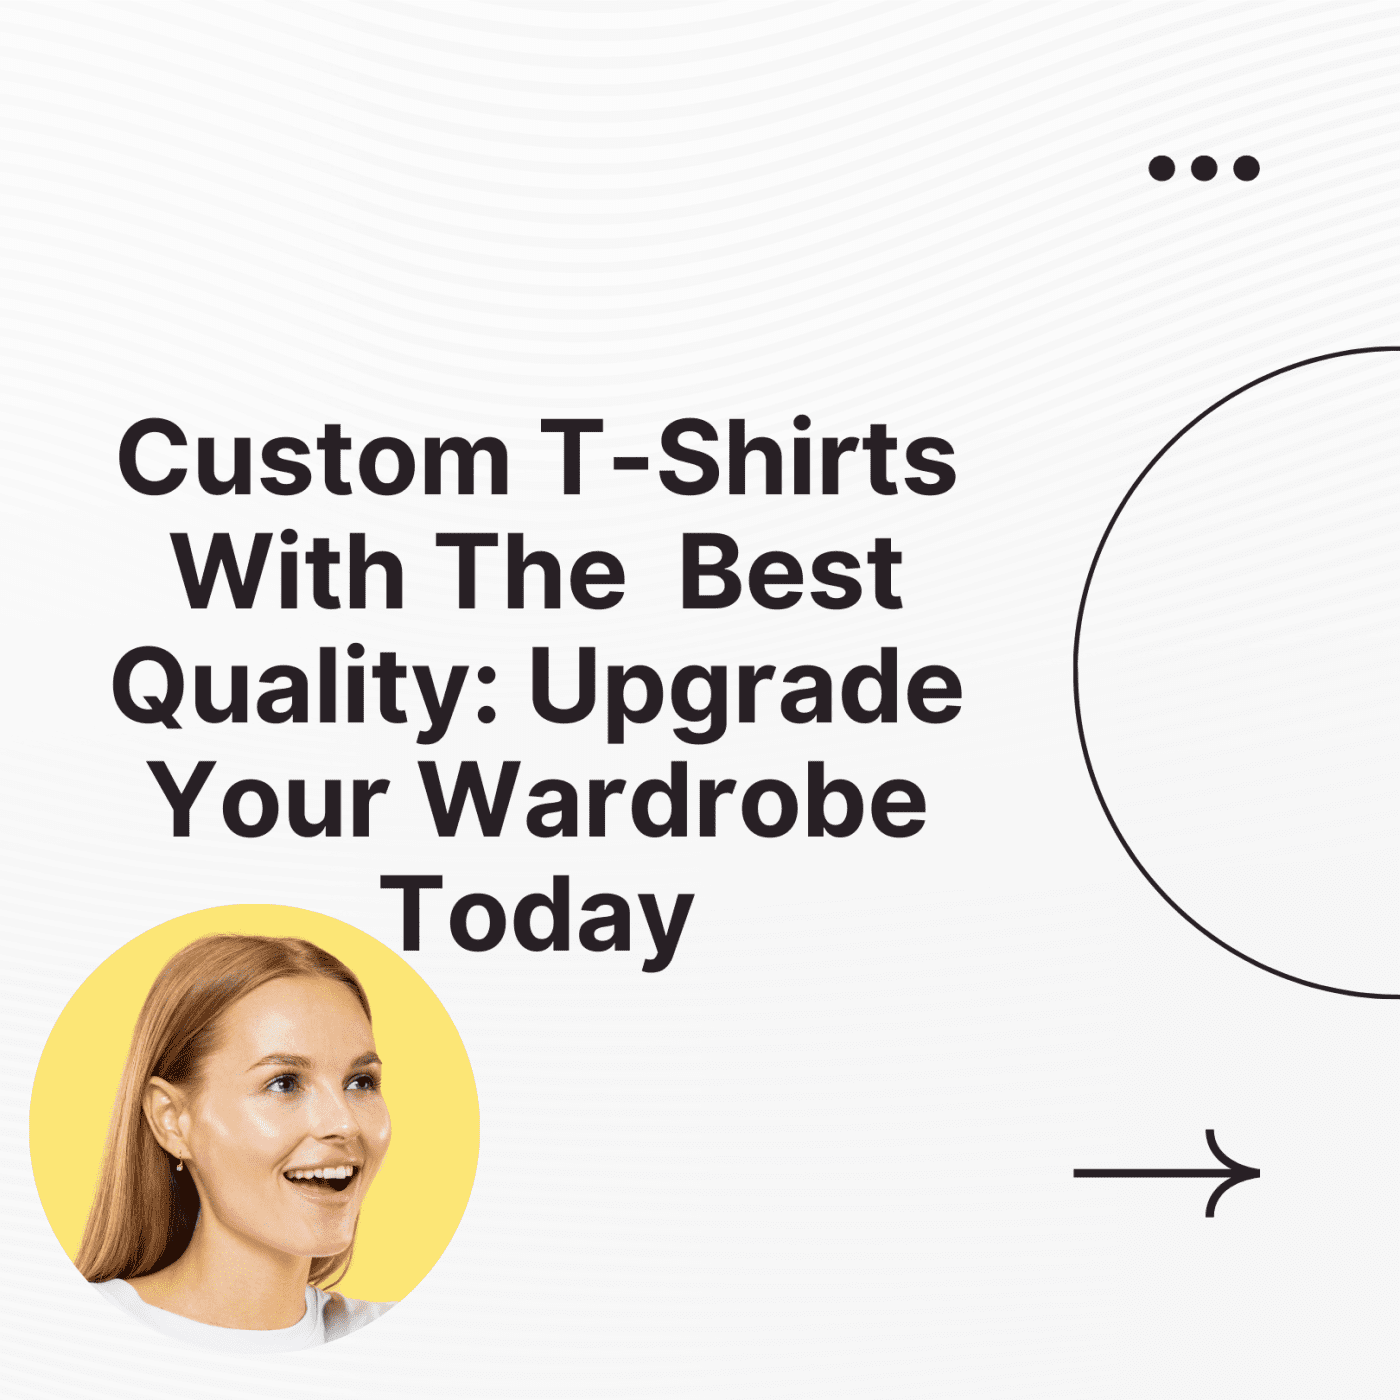 Custom T-Shirts Best Quality Upgrade Your Wardrobe Today, Custom T-Shirts Best Quality, custom t-shirts, custom t shirts